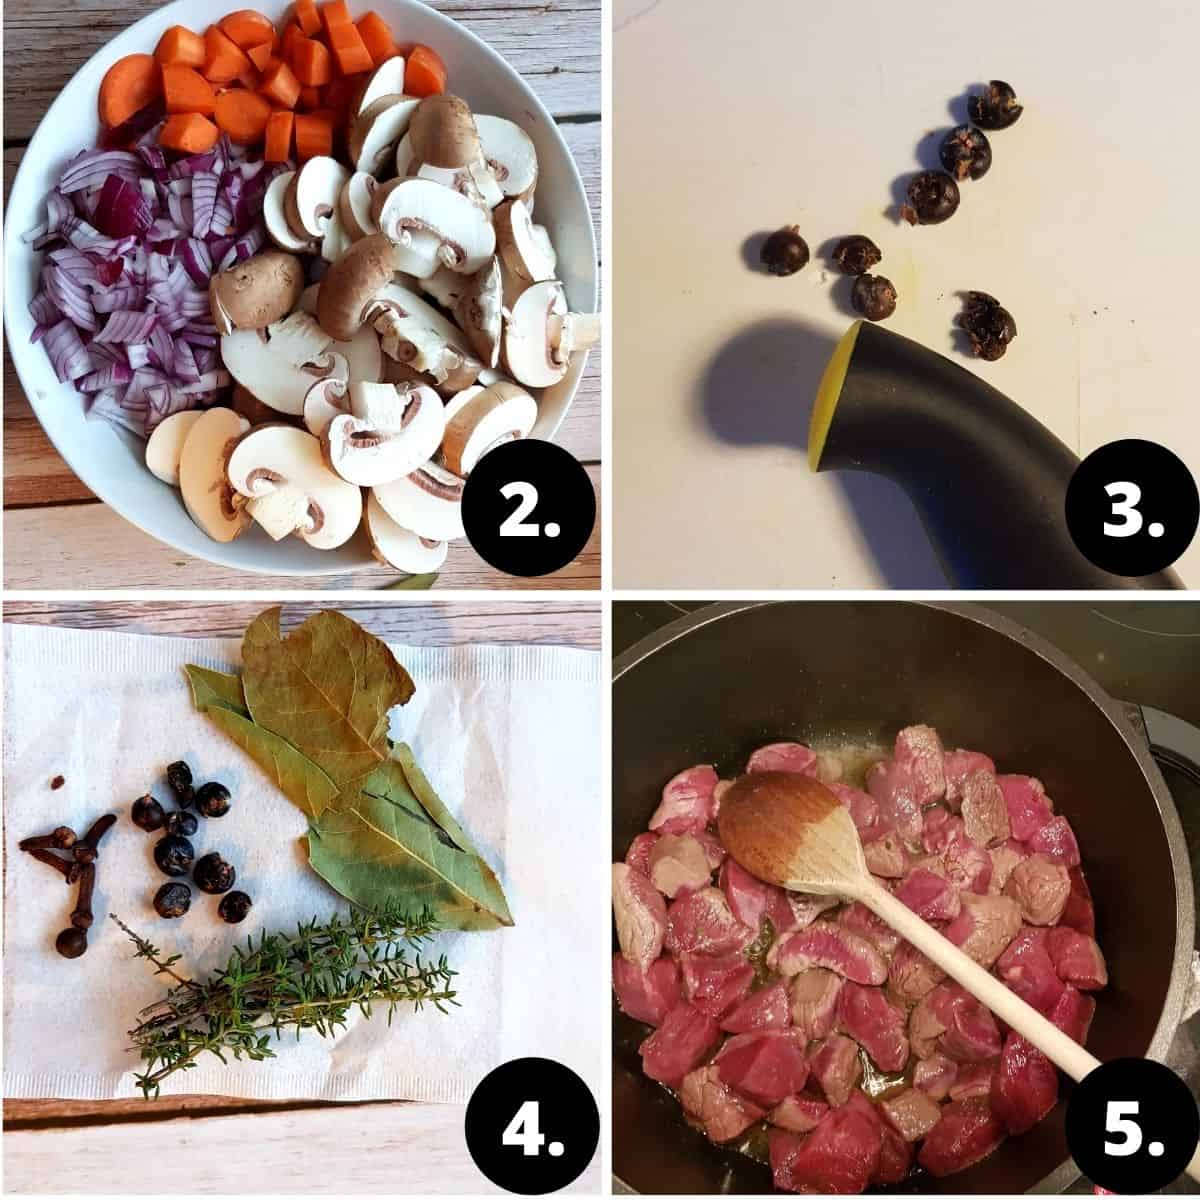 Venison Goulash Recipe Steps. 1. the chopped vegetables (onion mushrooms and carrots on a plate). 2. Juniper Berries Crushed. 3. All the herbs: Bayleaves, thyme, juniper berries, cloves on a loose teabag, 4 the venison is fryed in a sauceoan